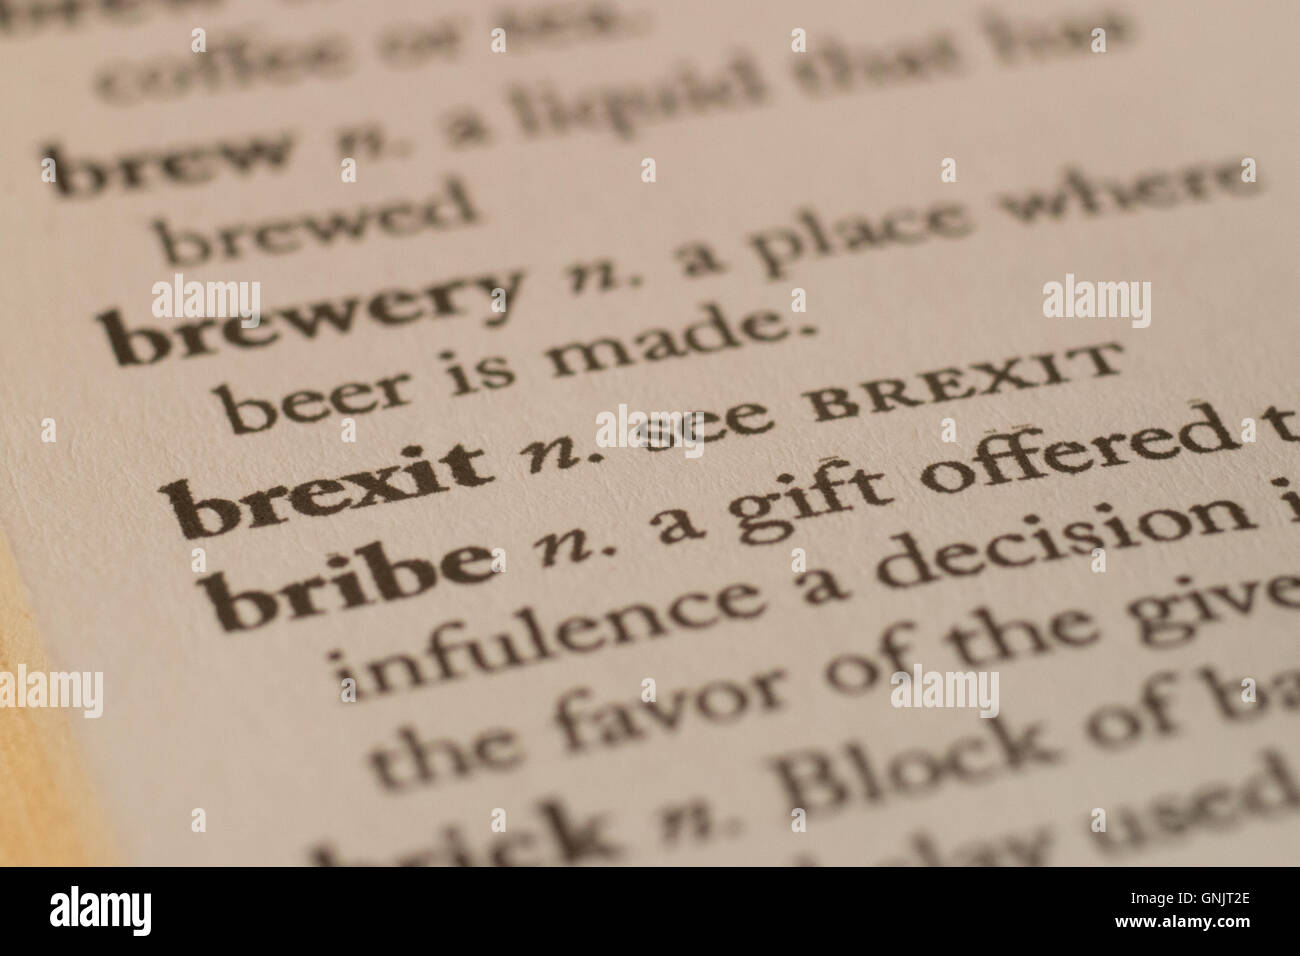 A 'dictionary' definition showing 'Brexit means brexit' Stock Photo